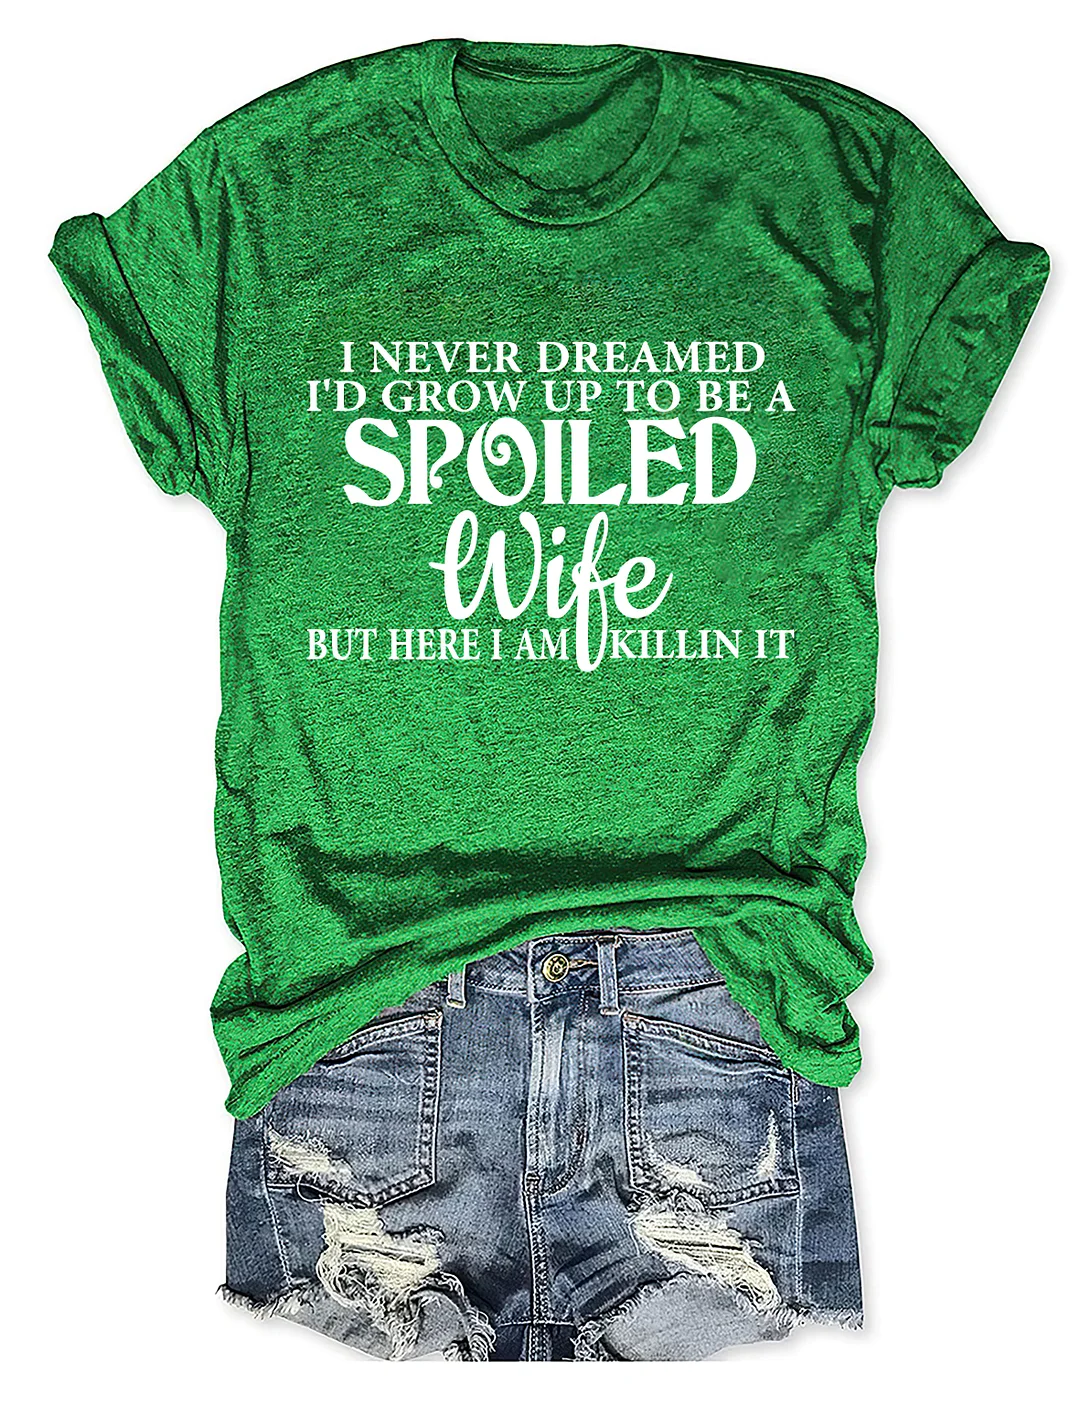 I Never Dreamed I'd Grow Up To Be A Spoiled Wife T-shirt